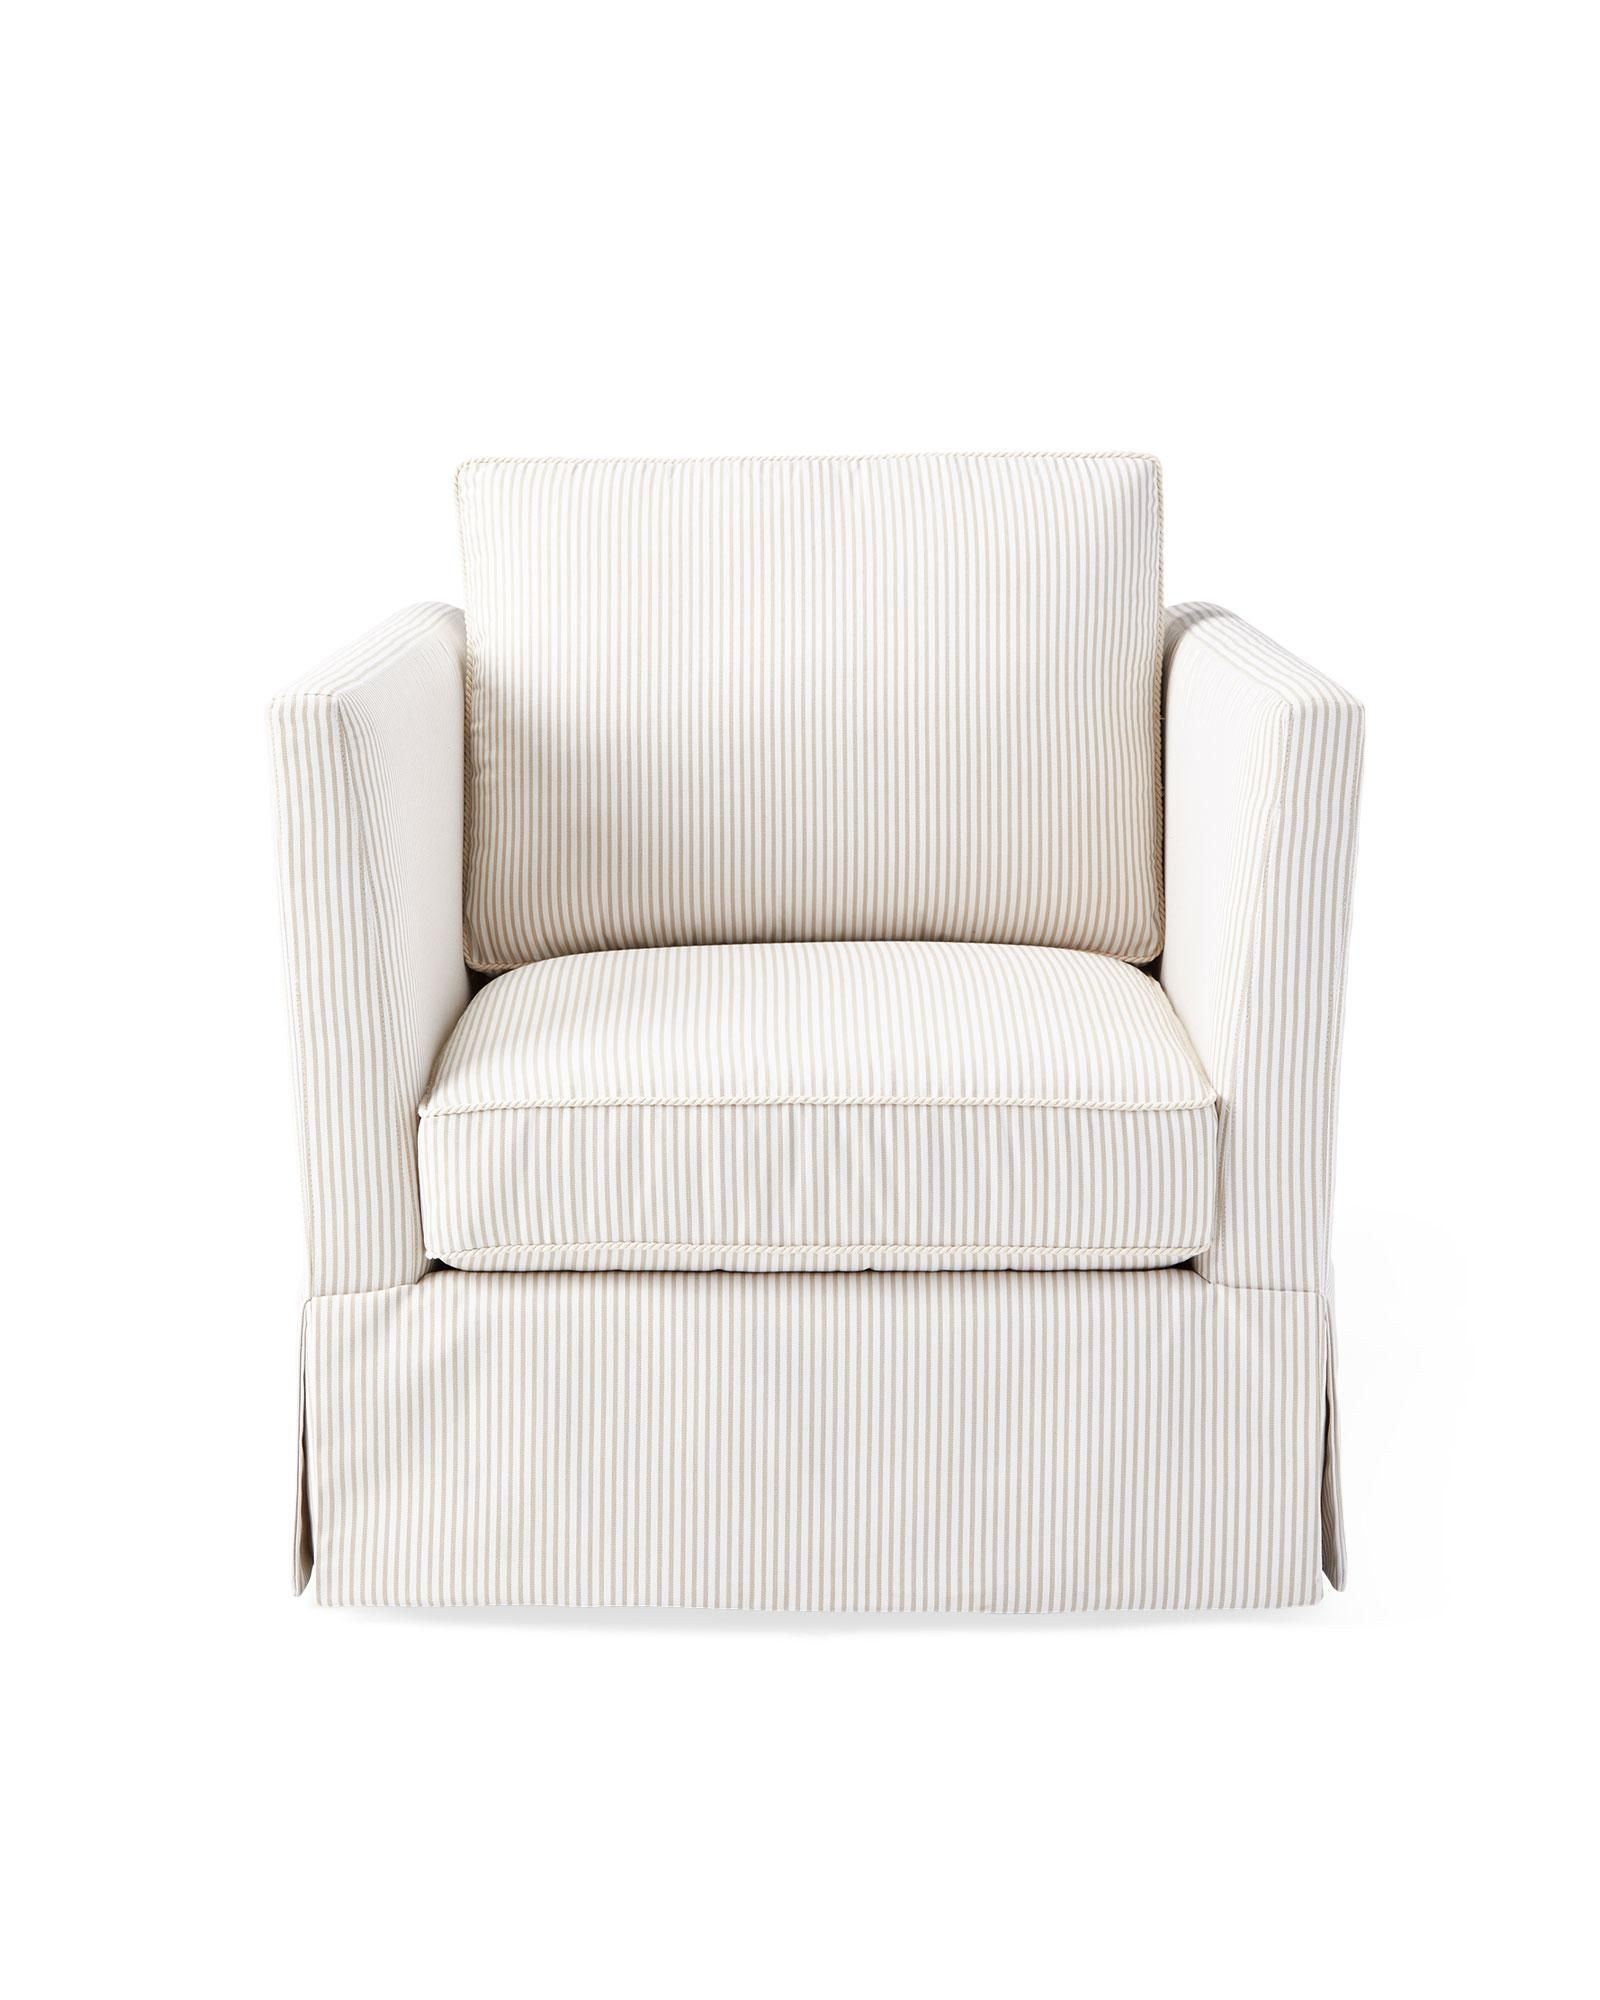 Cutler Swivel Chair - Perennials Sand Pinstripe with Rope Trim | Serena and Lily